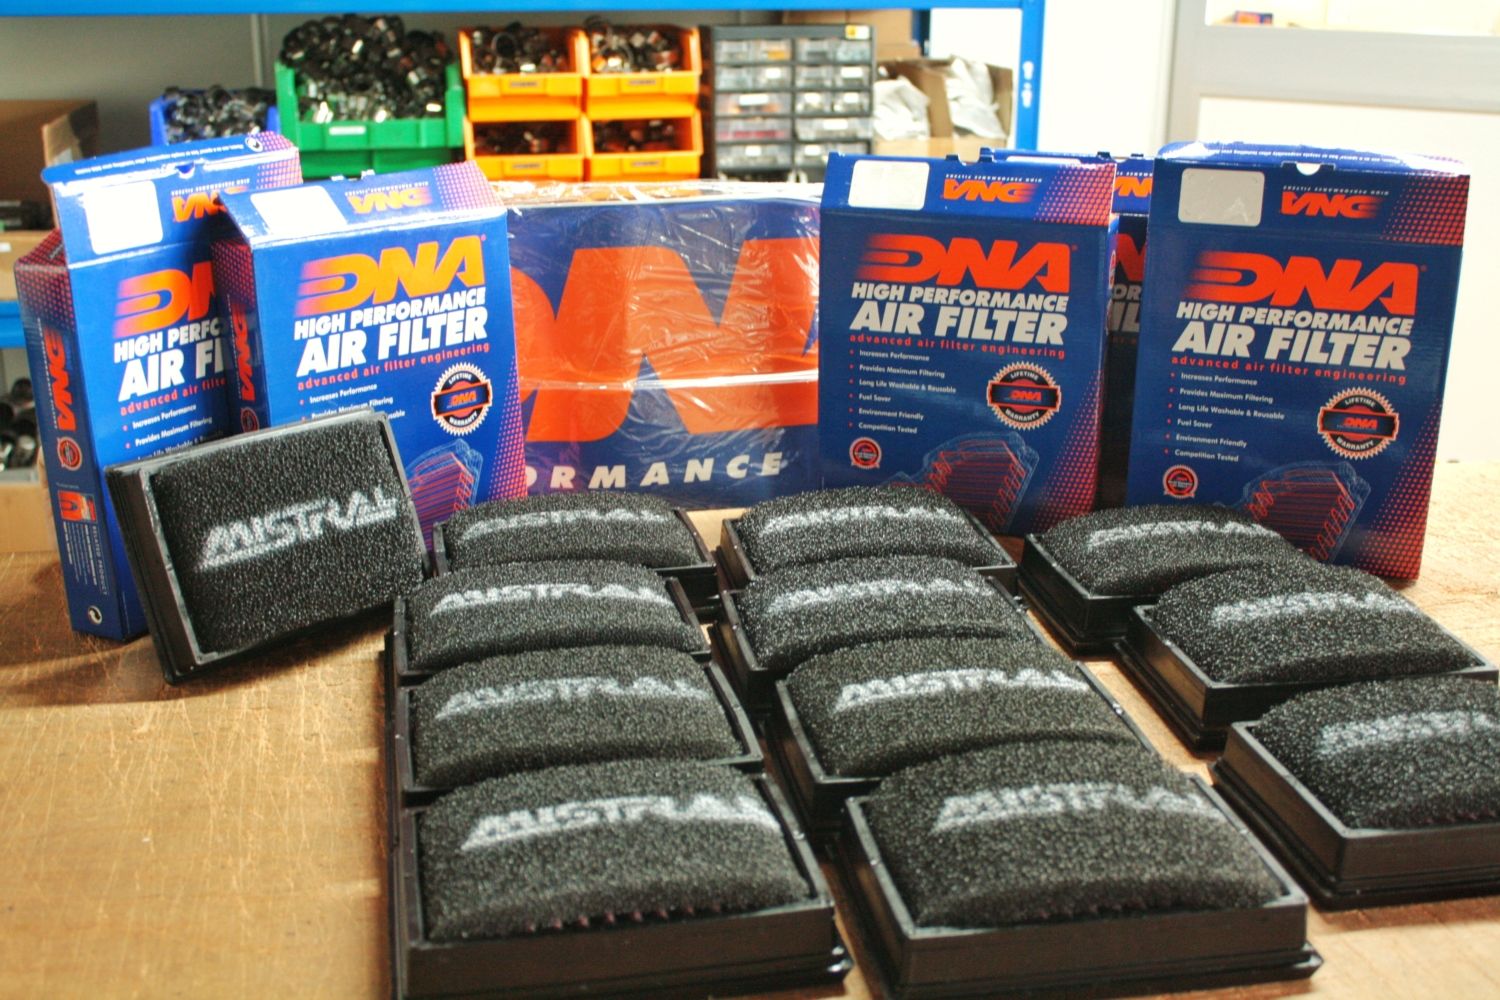 Racing air filter for 1400 models, Griso, and Stelvio